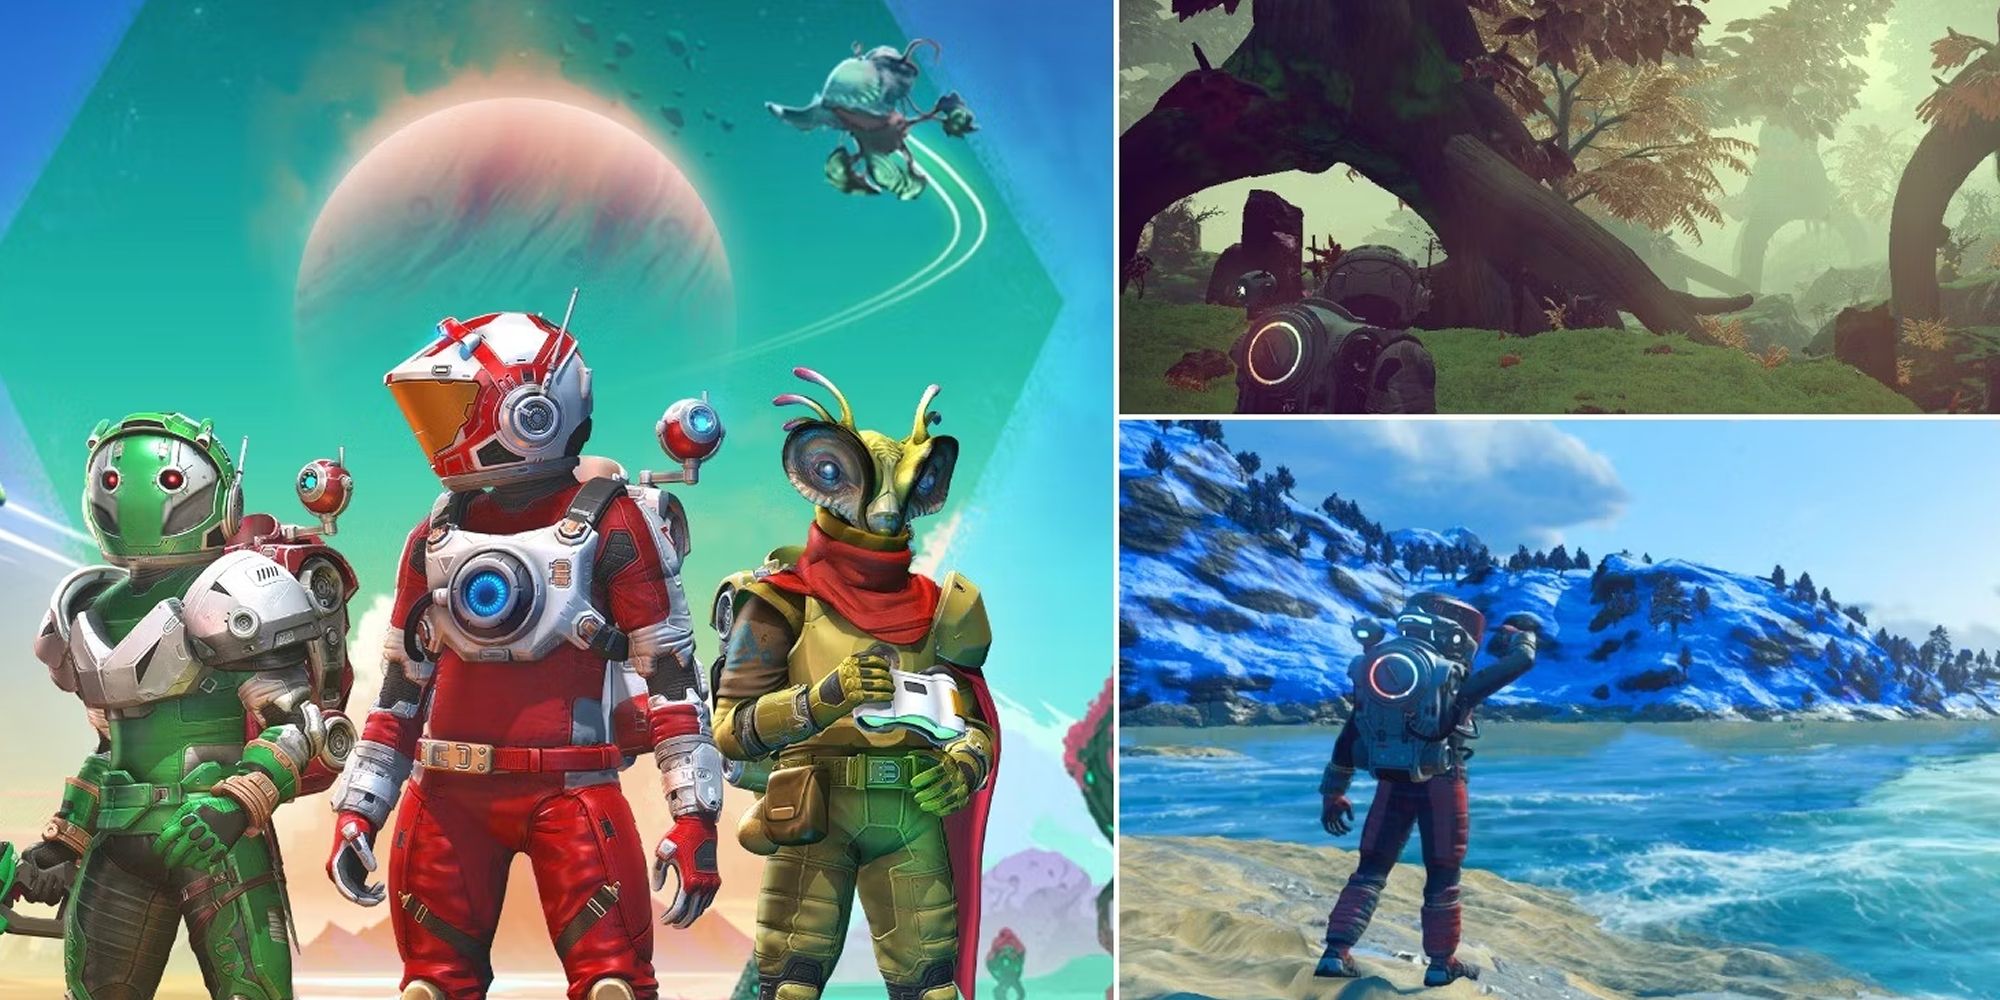 A Split Image Depicting Scenes From No Man's Sky